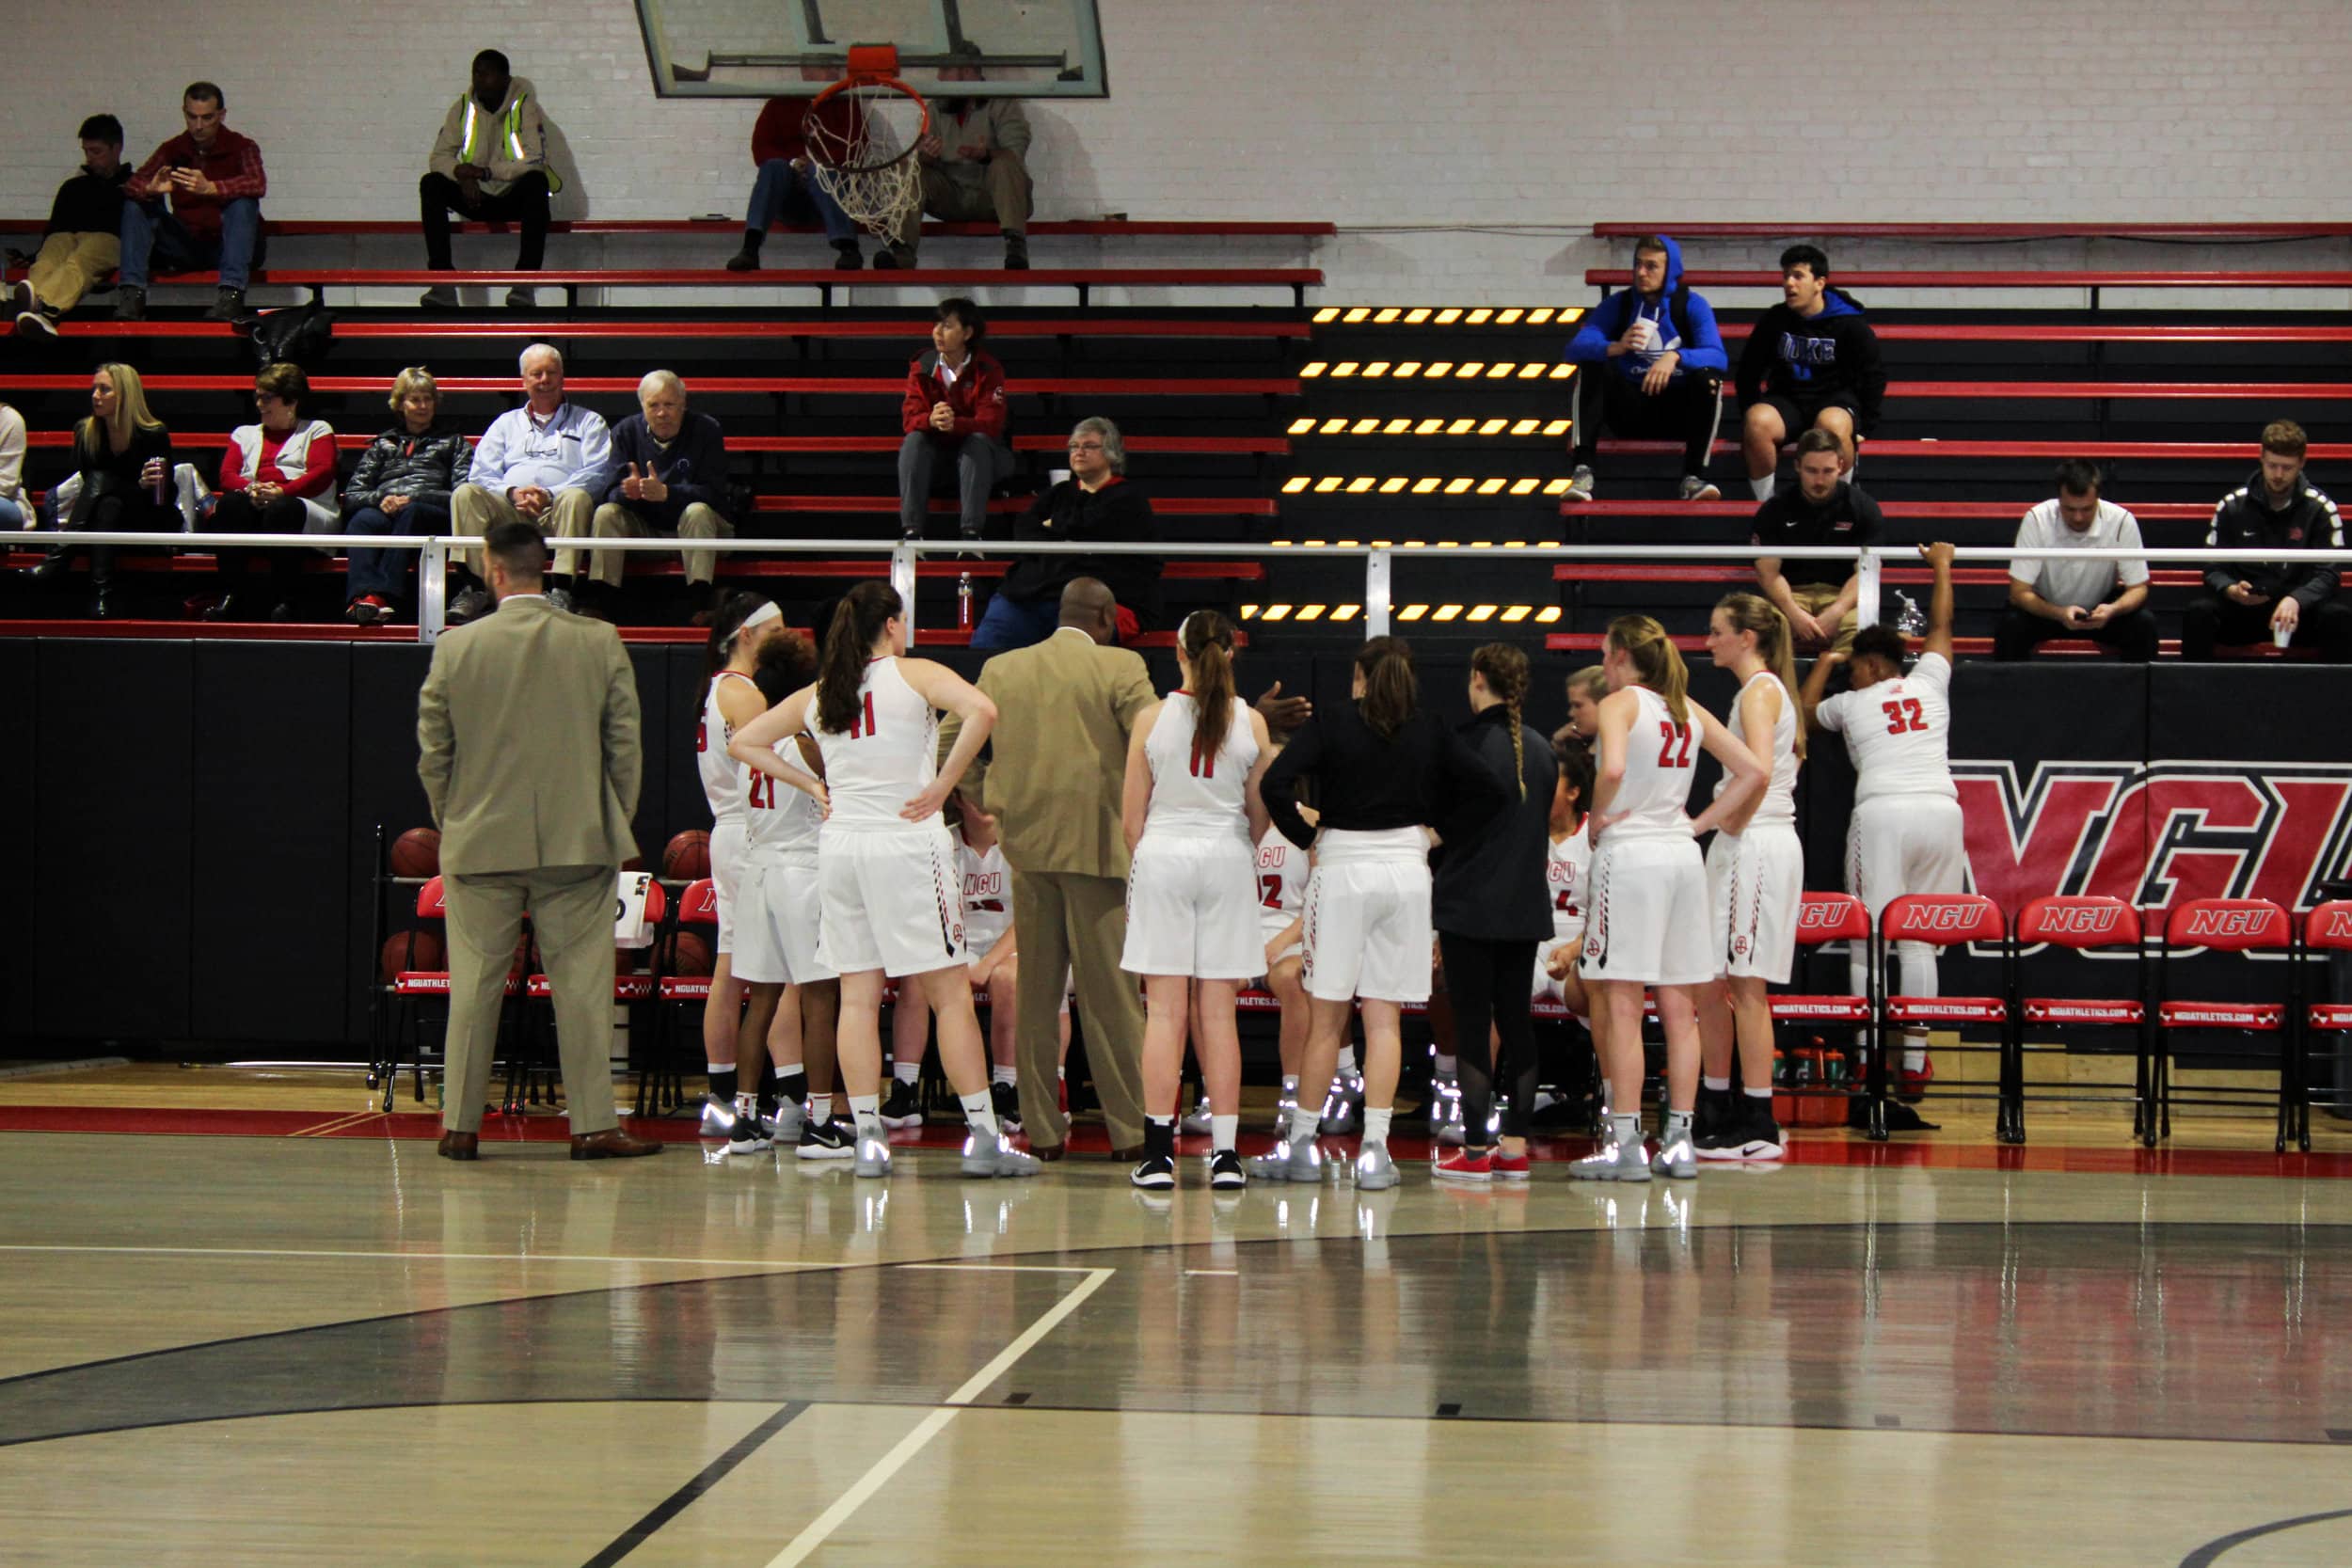 The NGU Womens Basketball team huddles together during a time out to listen to their coach.